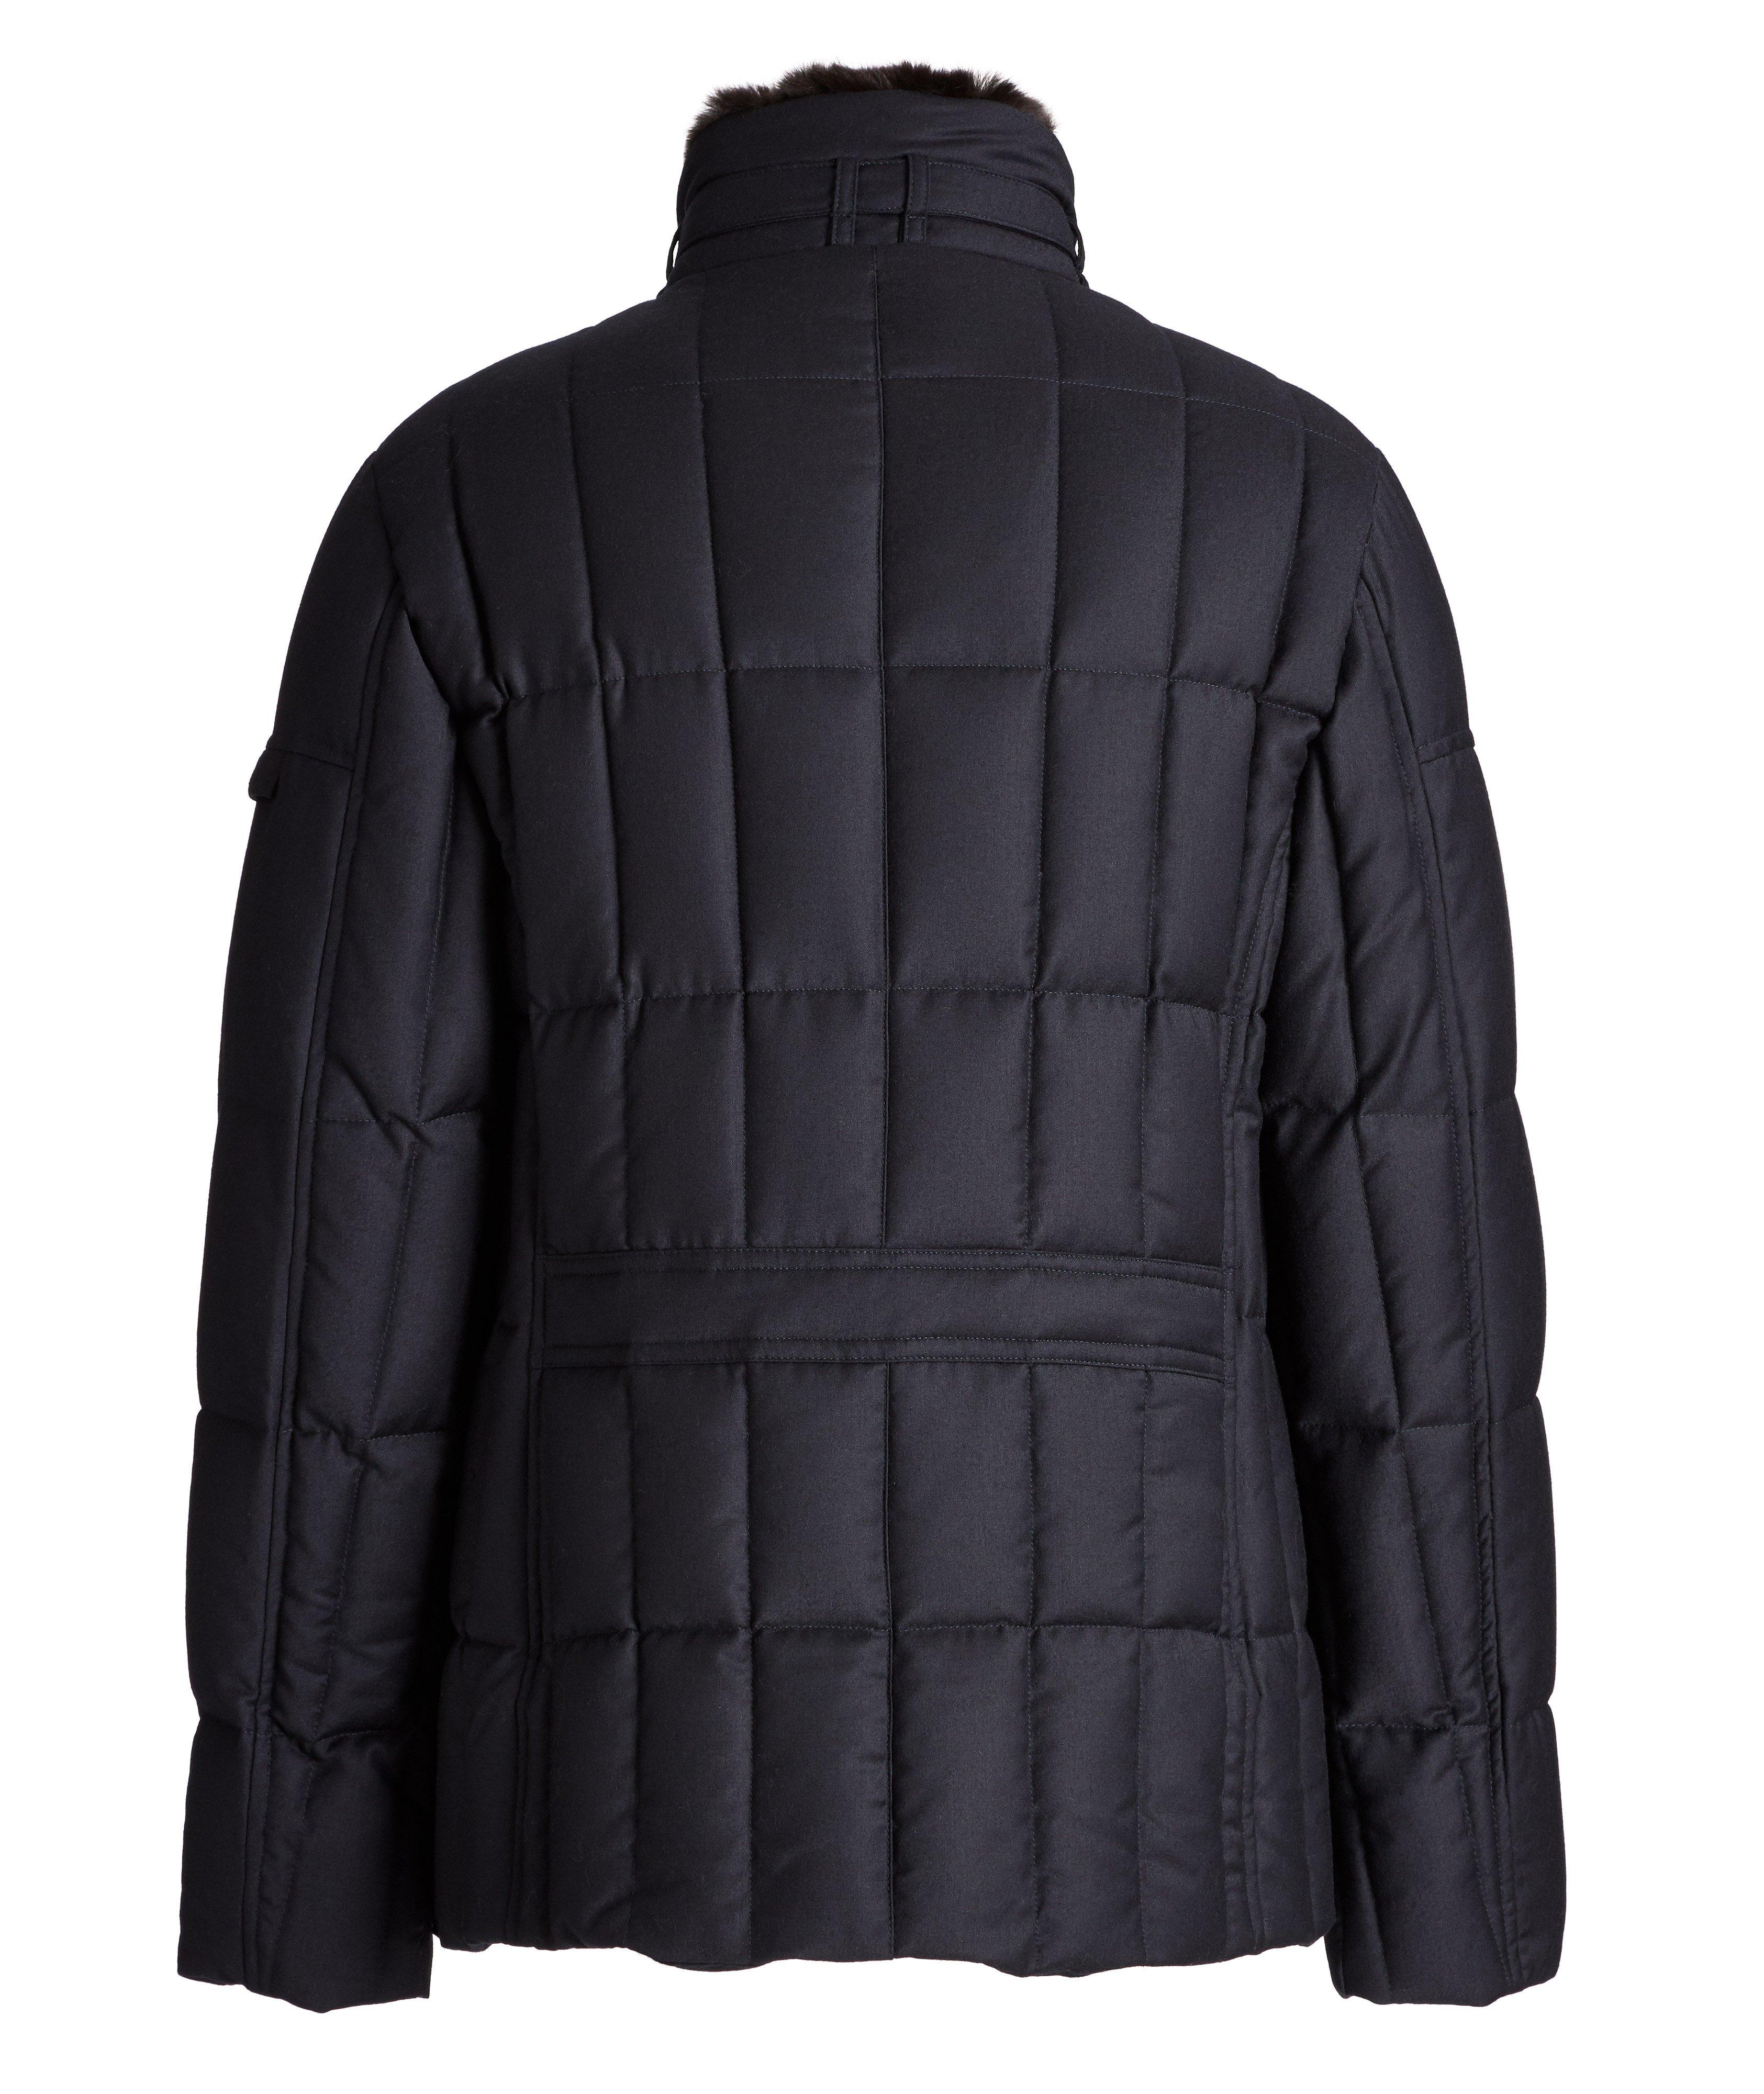 Siro Quilted Wool-Cashmere Jacket image 1